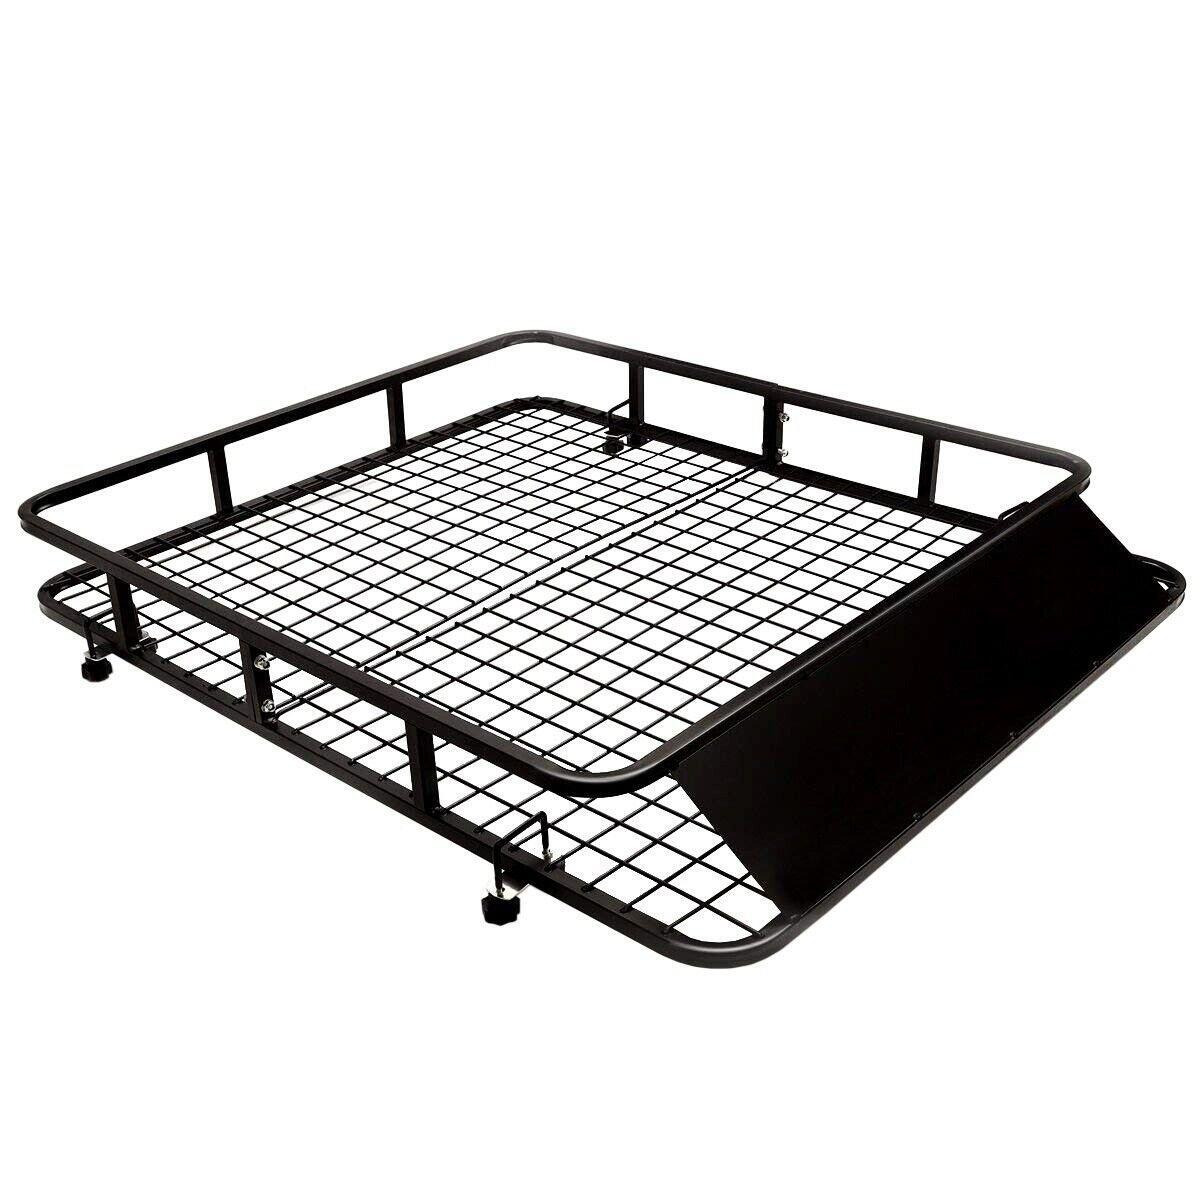 Steel Cargo Roof Rack Basket Truck Cars Top Luggage Carrier 75kg Weight Capacity - image 1